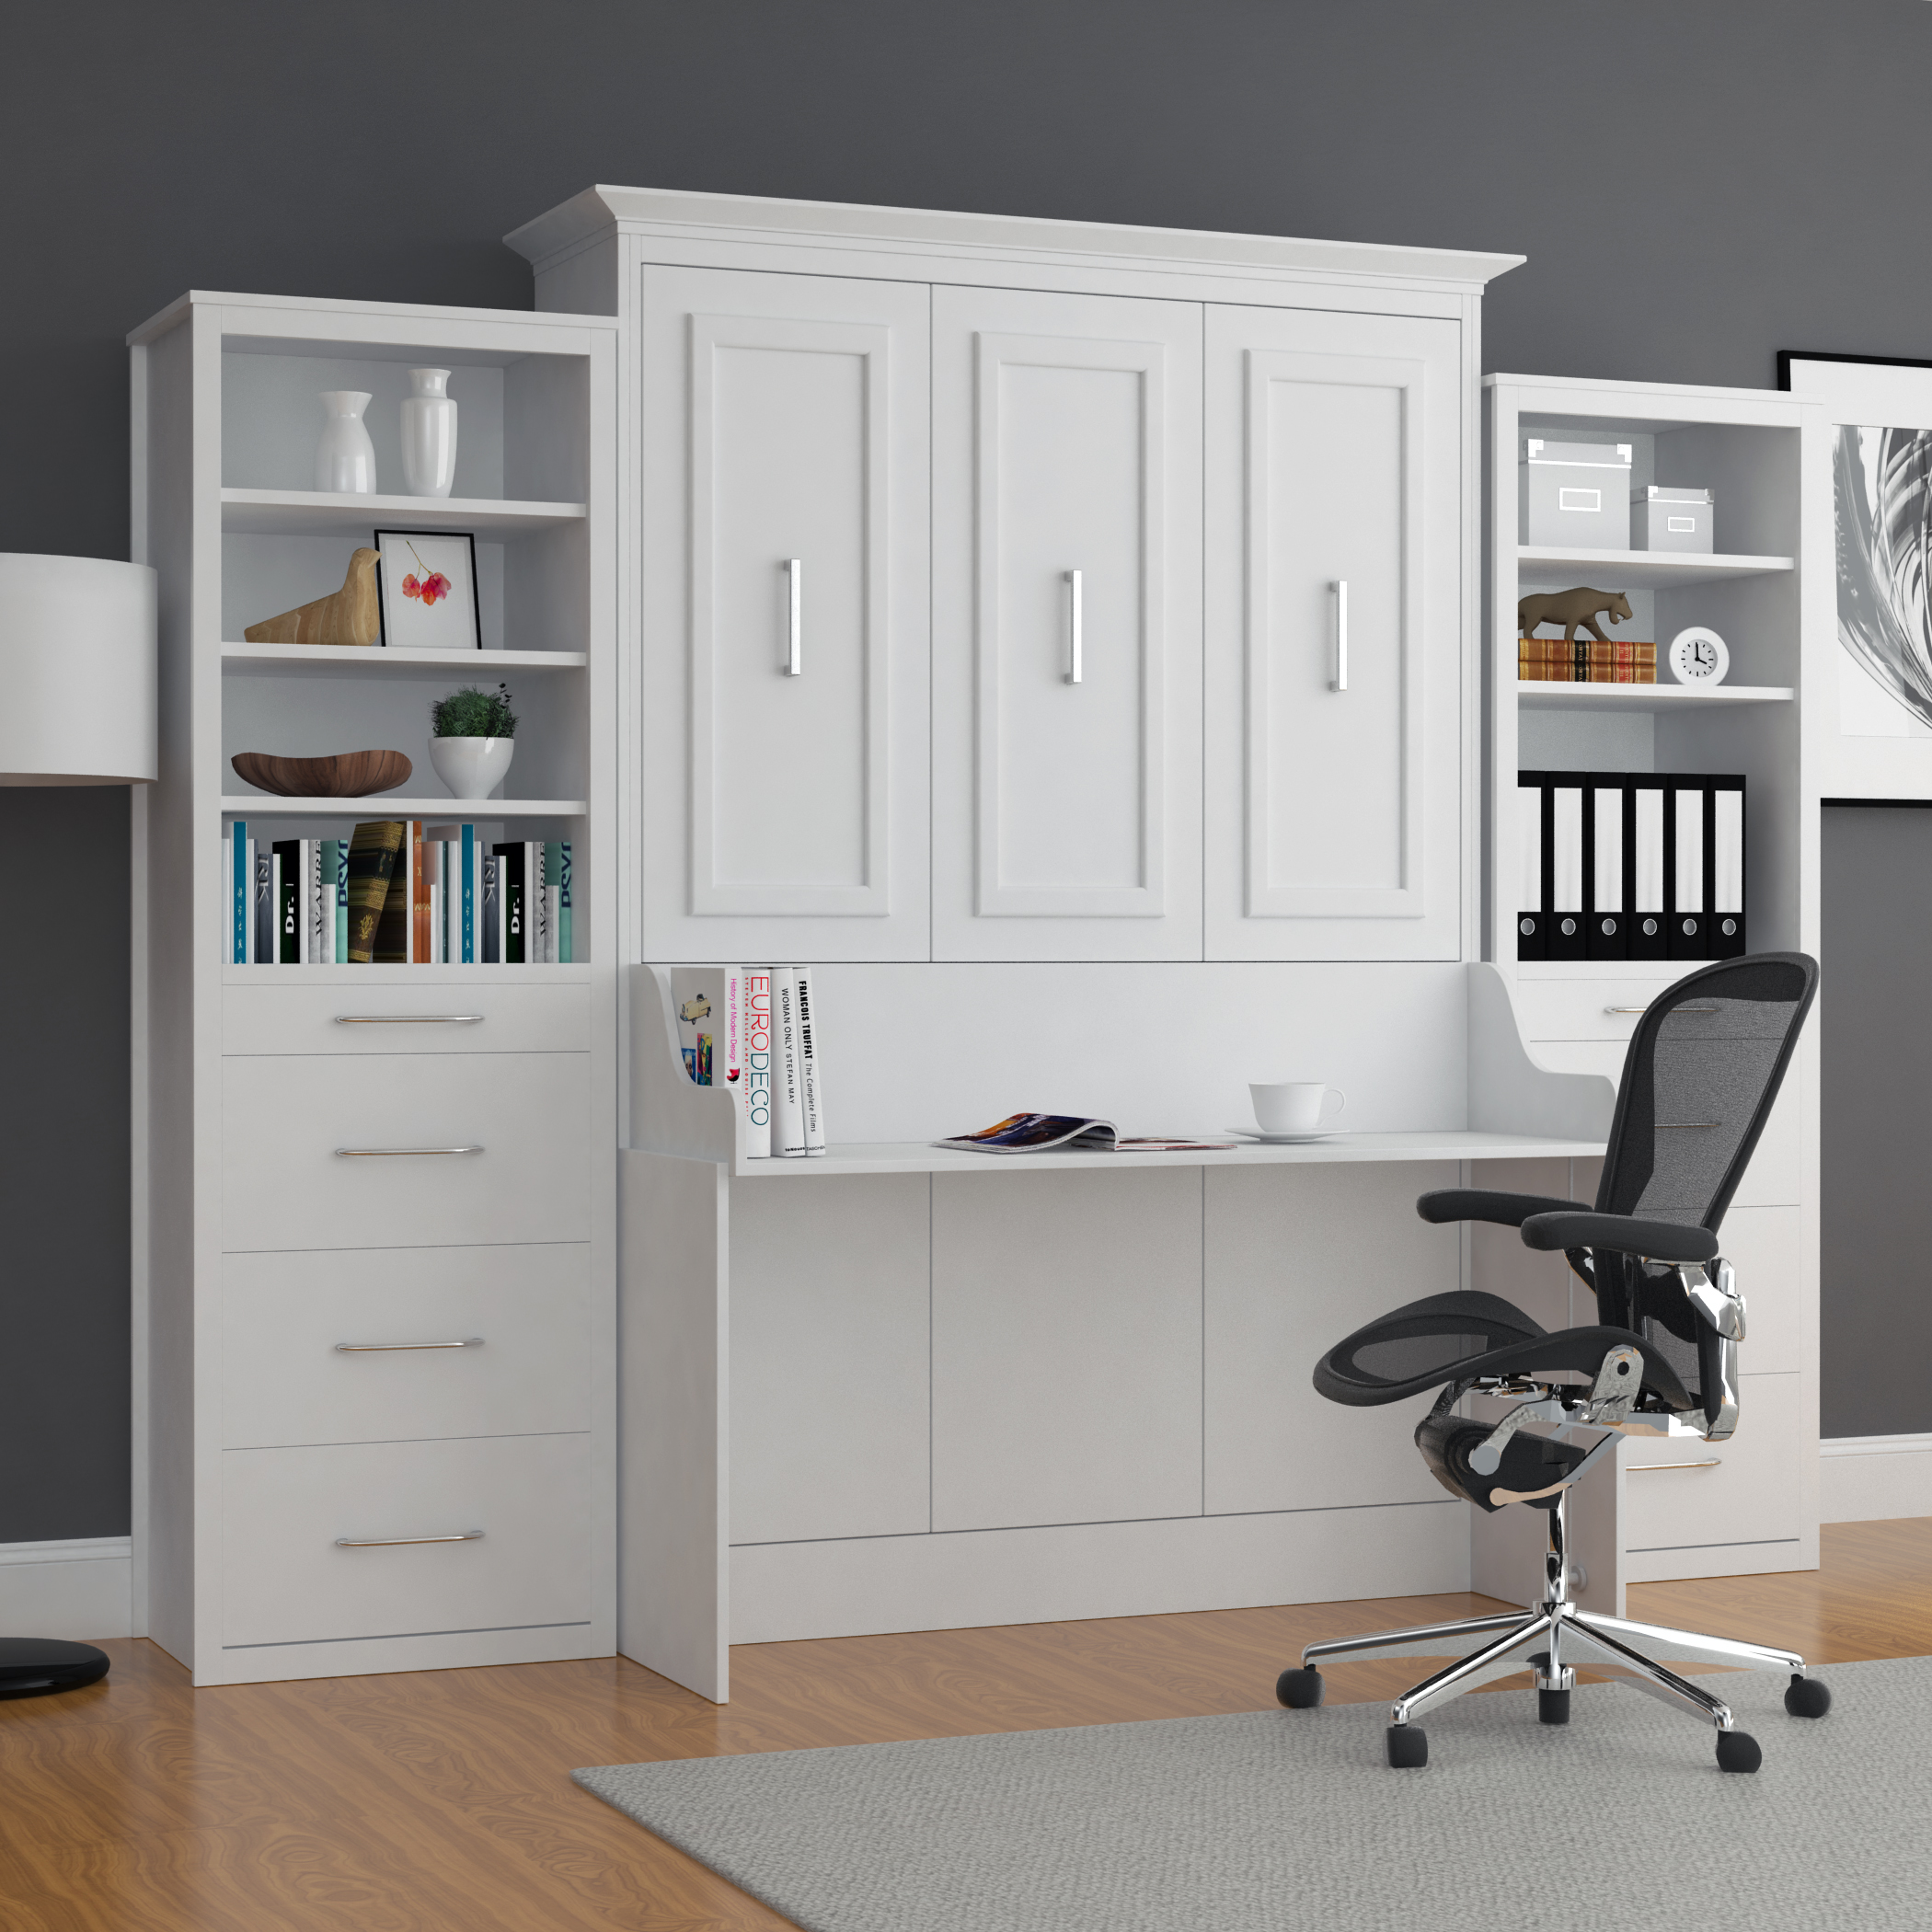 Alegra White Diy Murphy Desk Bed Queen, How To Build A Murphy Bed With Desk